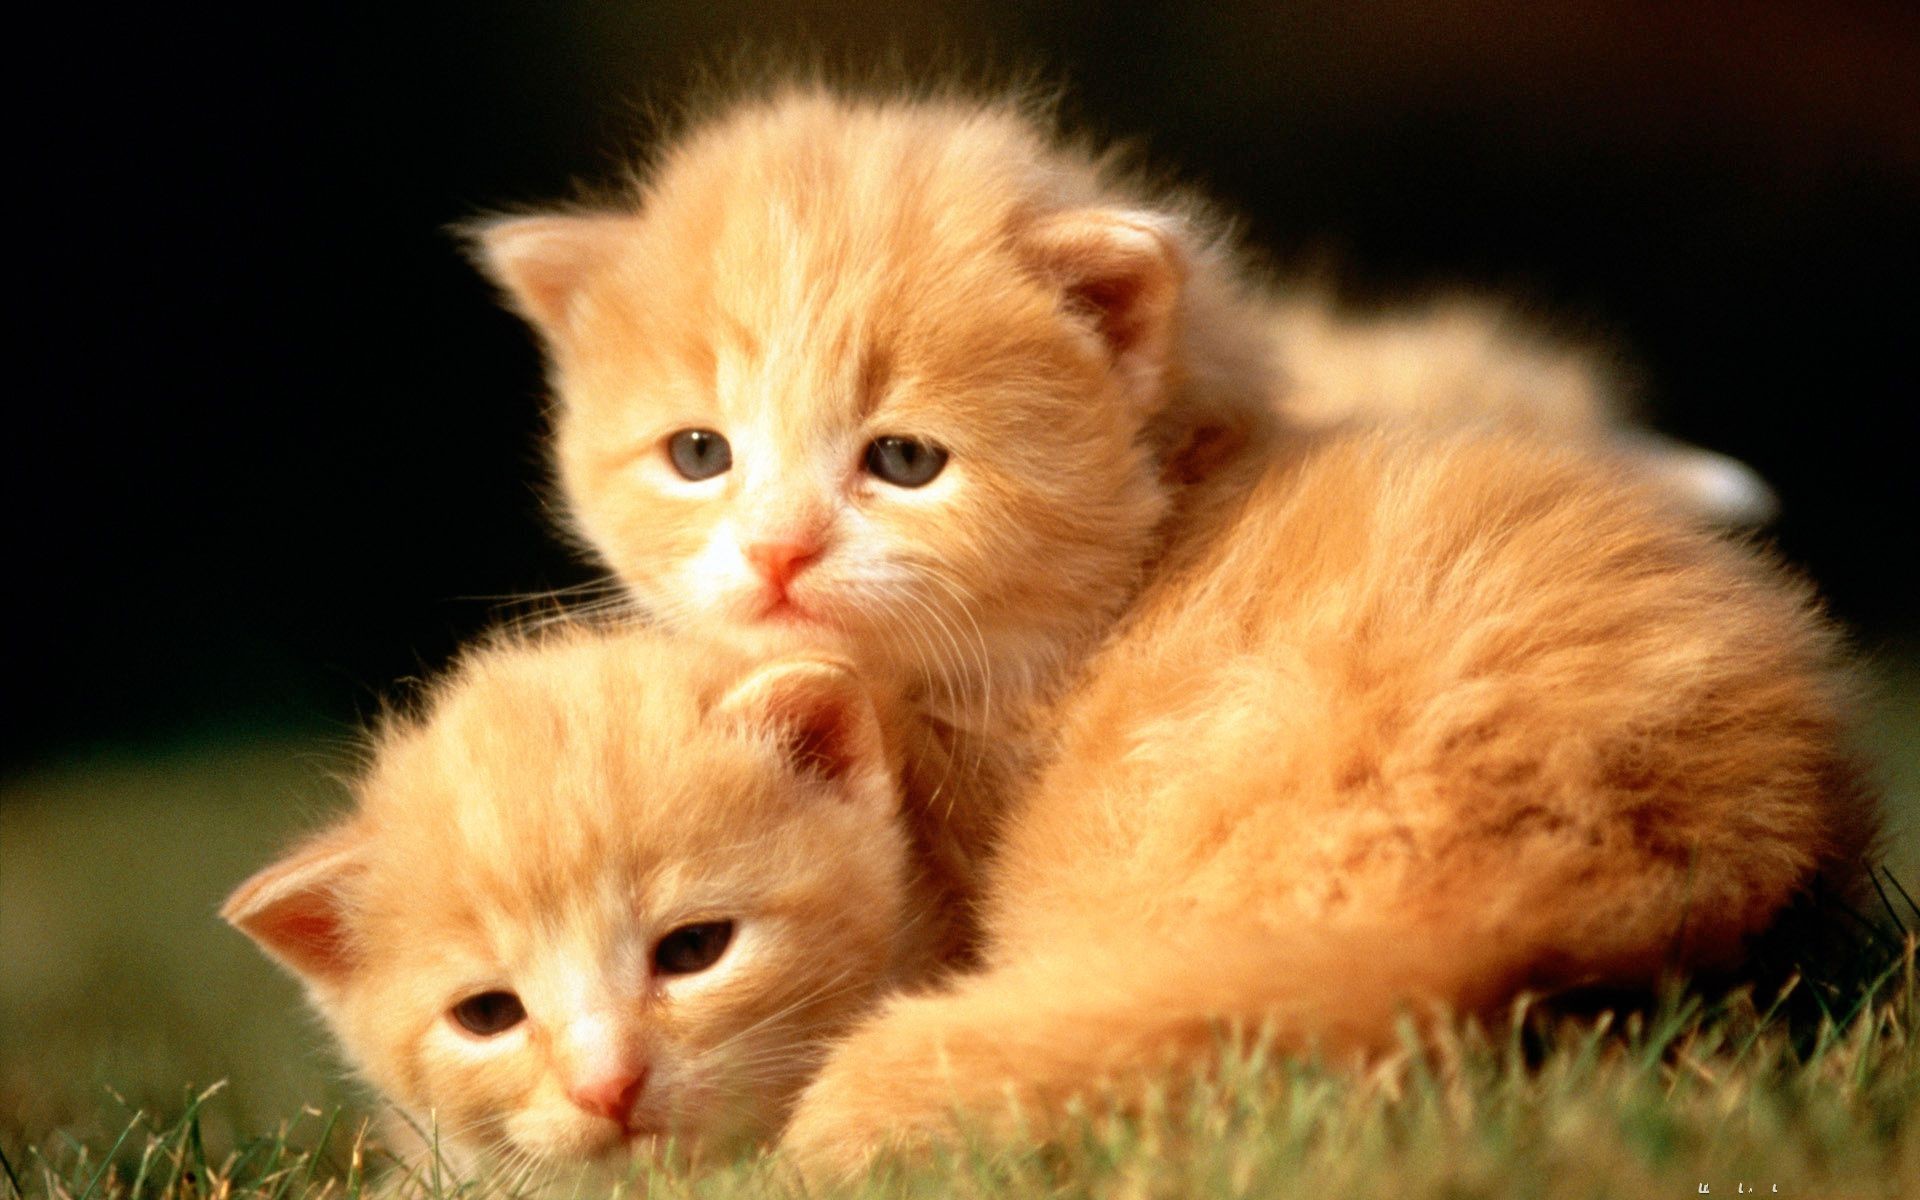 1920x1200 Cute Baby Animals Wallpaper - Android Apps on Google Play 28 Of The Cutest  Baby Animals ...